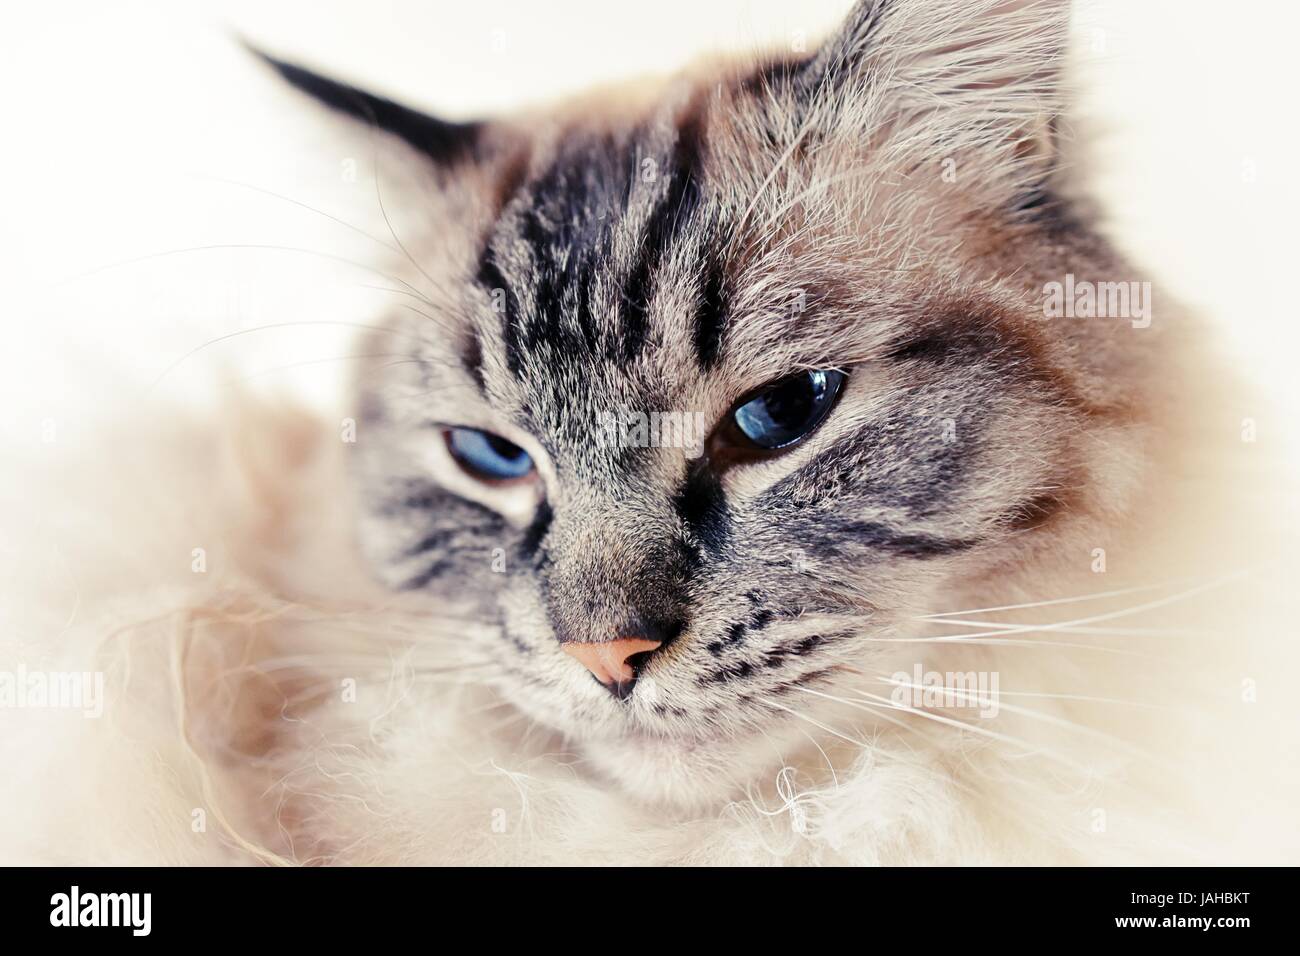 Portrait de chat Ragdoll Seal Tabby (Lynx) Looking at Camera Close Up Banque D'Images